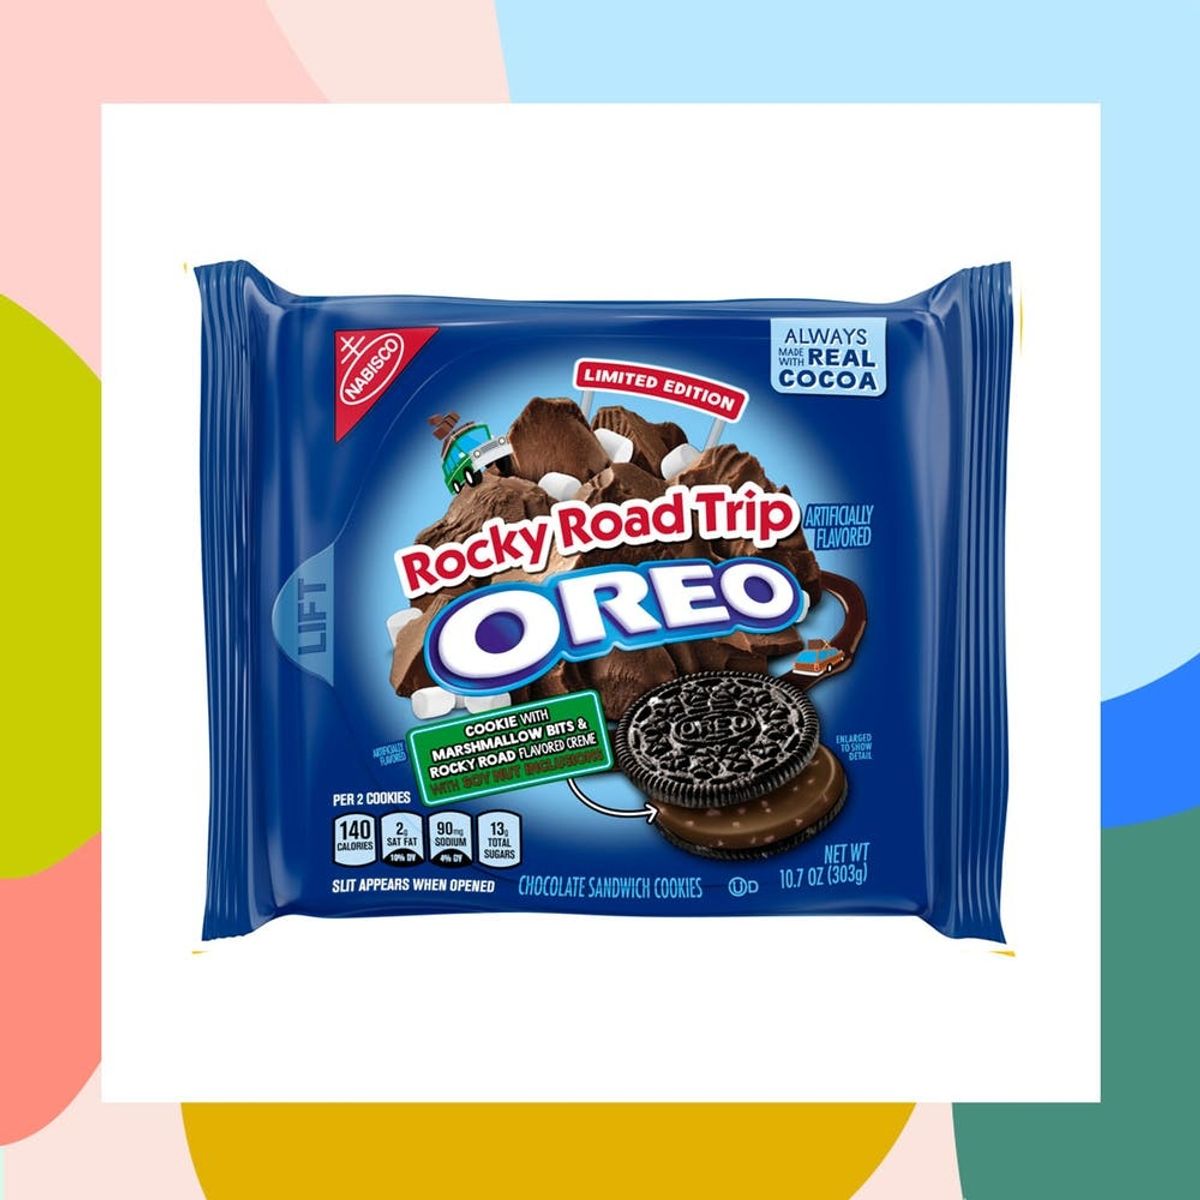 Oreo Will Drop Two New Flavors for National Ice Cream Day!